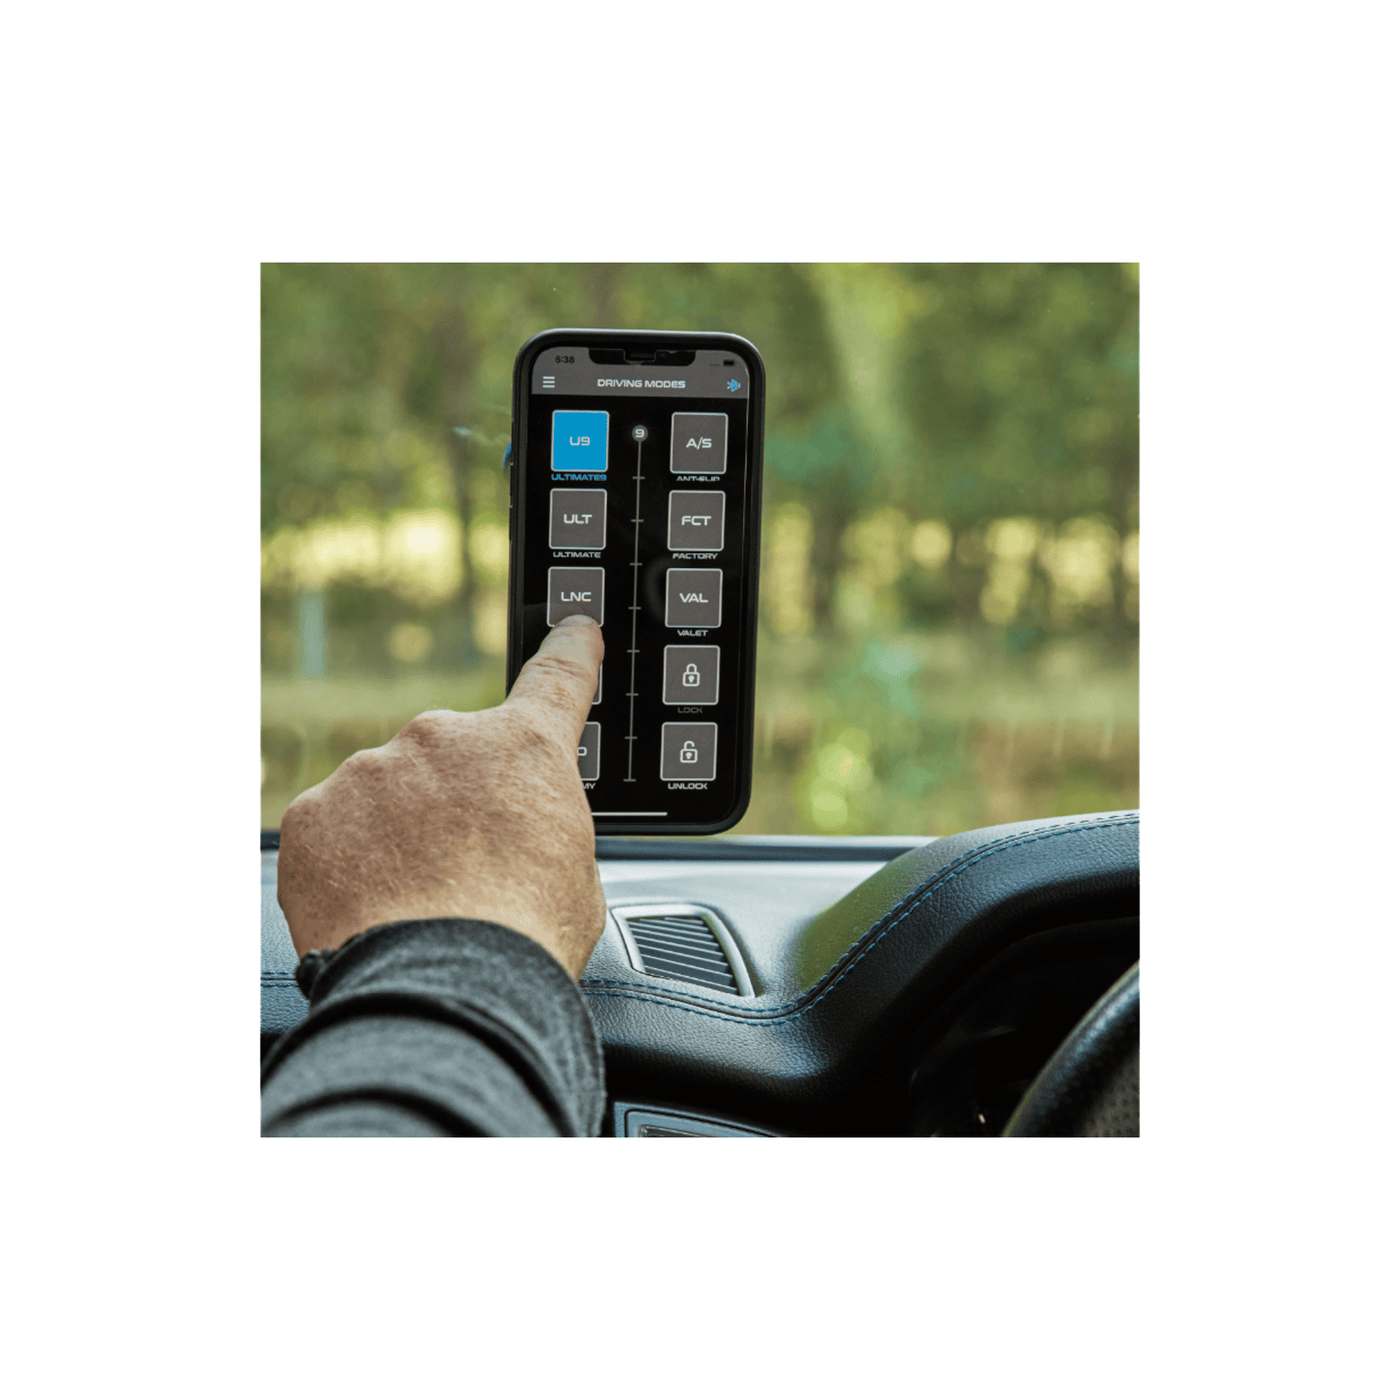 EVCX Throttle Controller to Suit Various Infiniti and Nissan vehicles - OZI4X4 PTY LTD